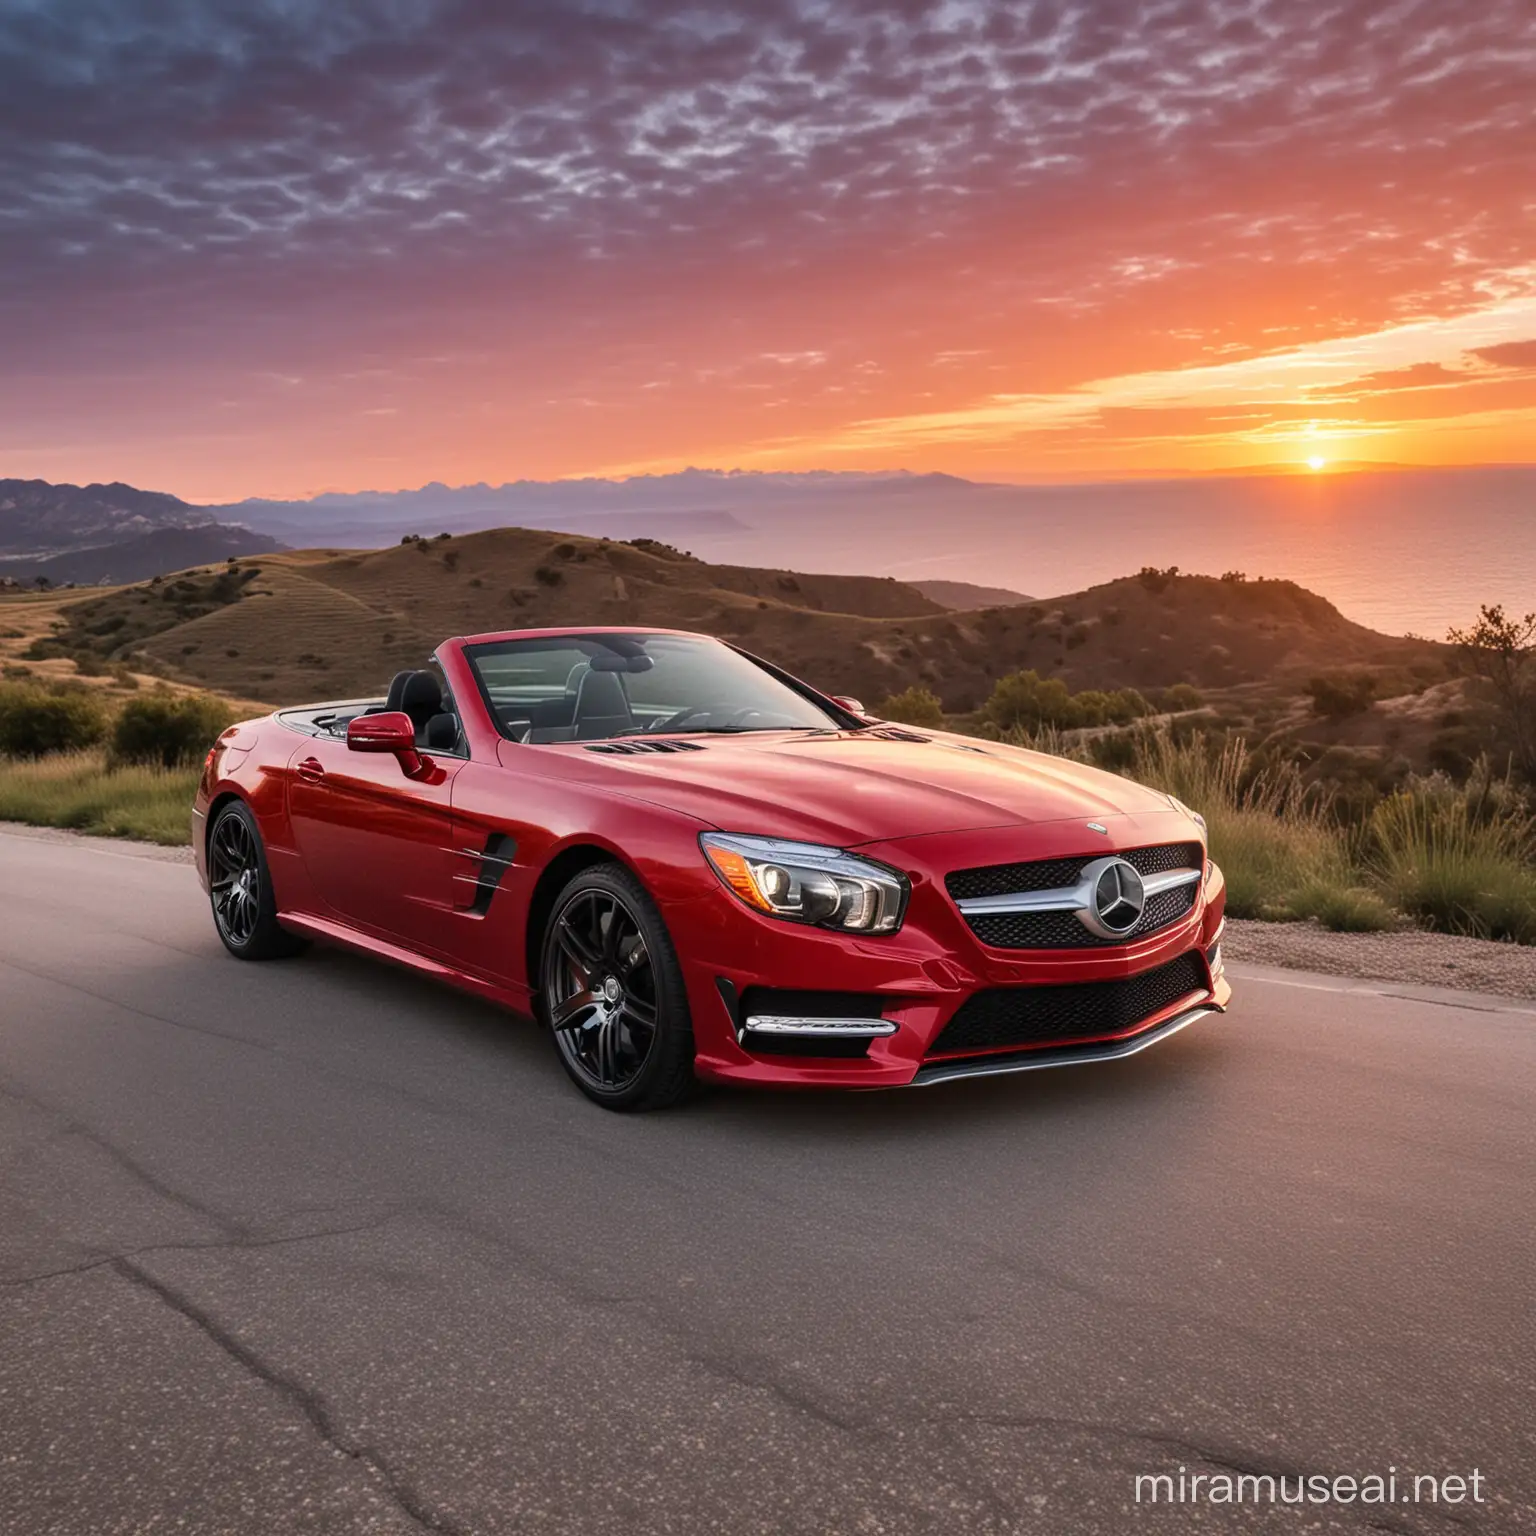 Red 2014 Mercedes SL400 with dramatic sunset